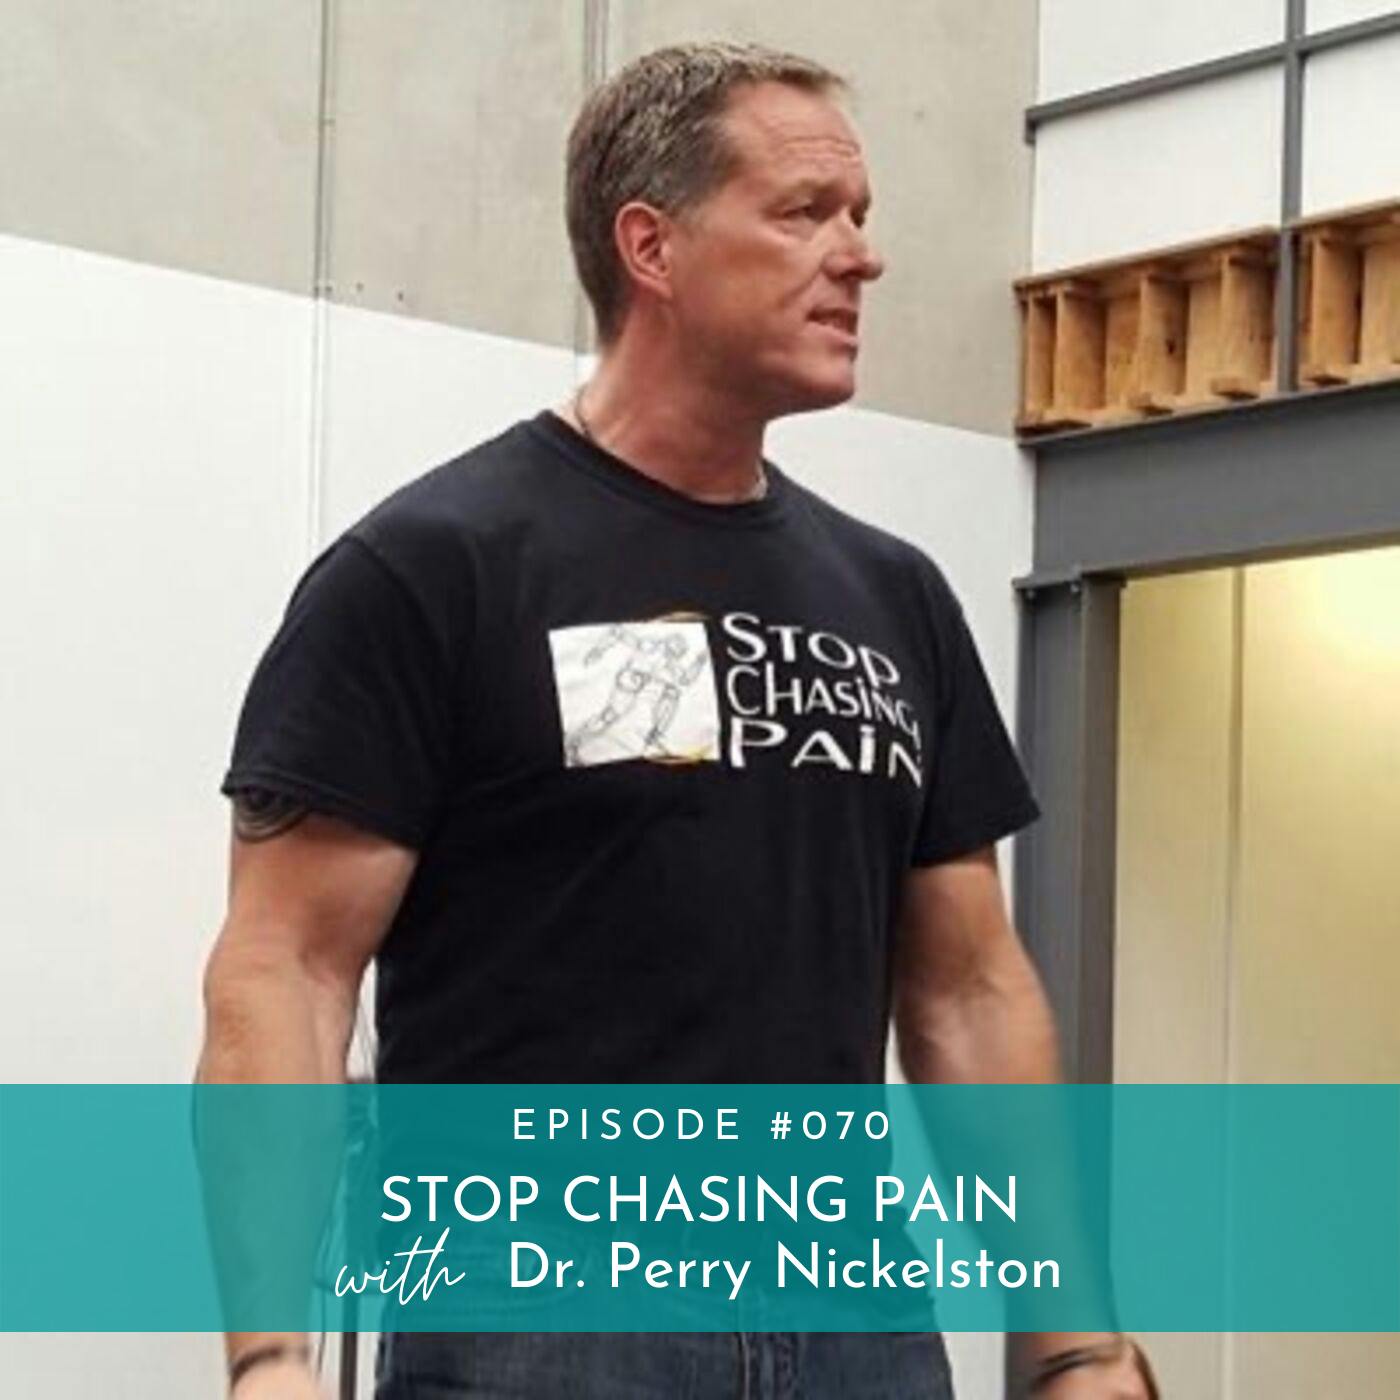 Stop Chasing Pain with Dr. Perry Nickelston